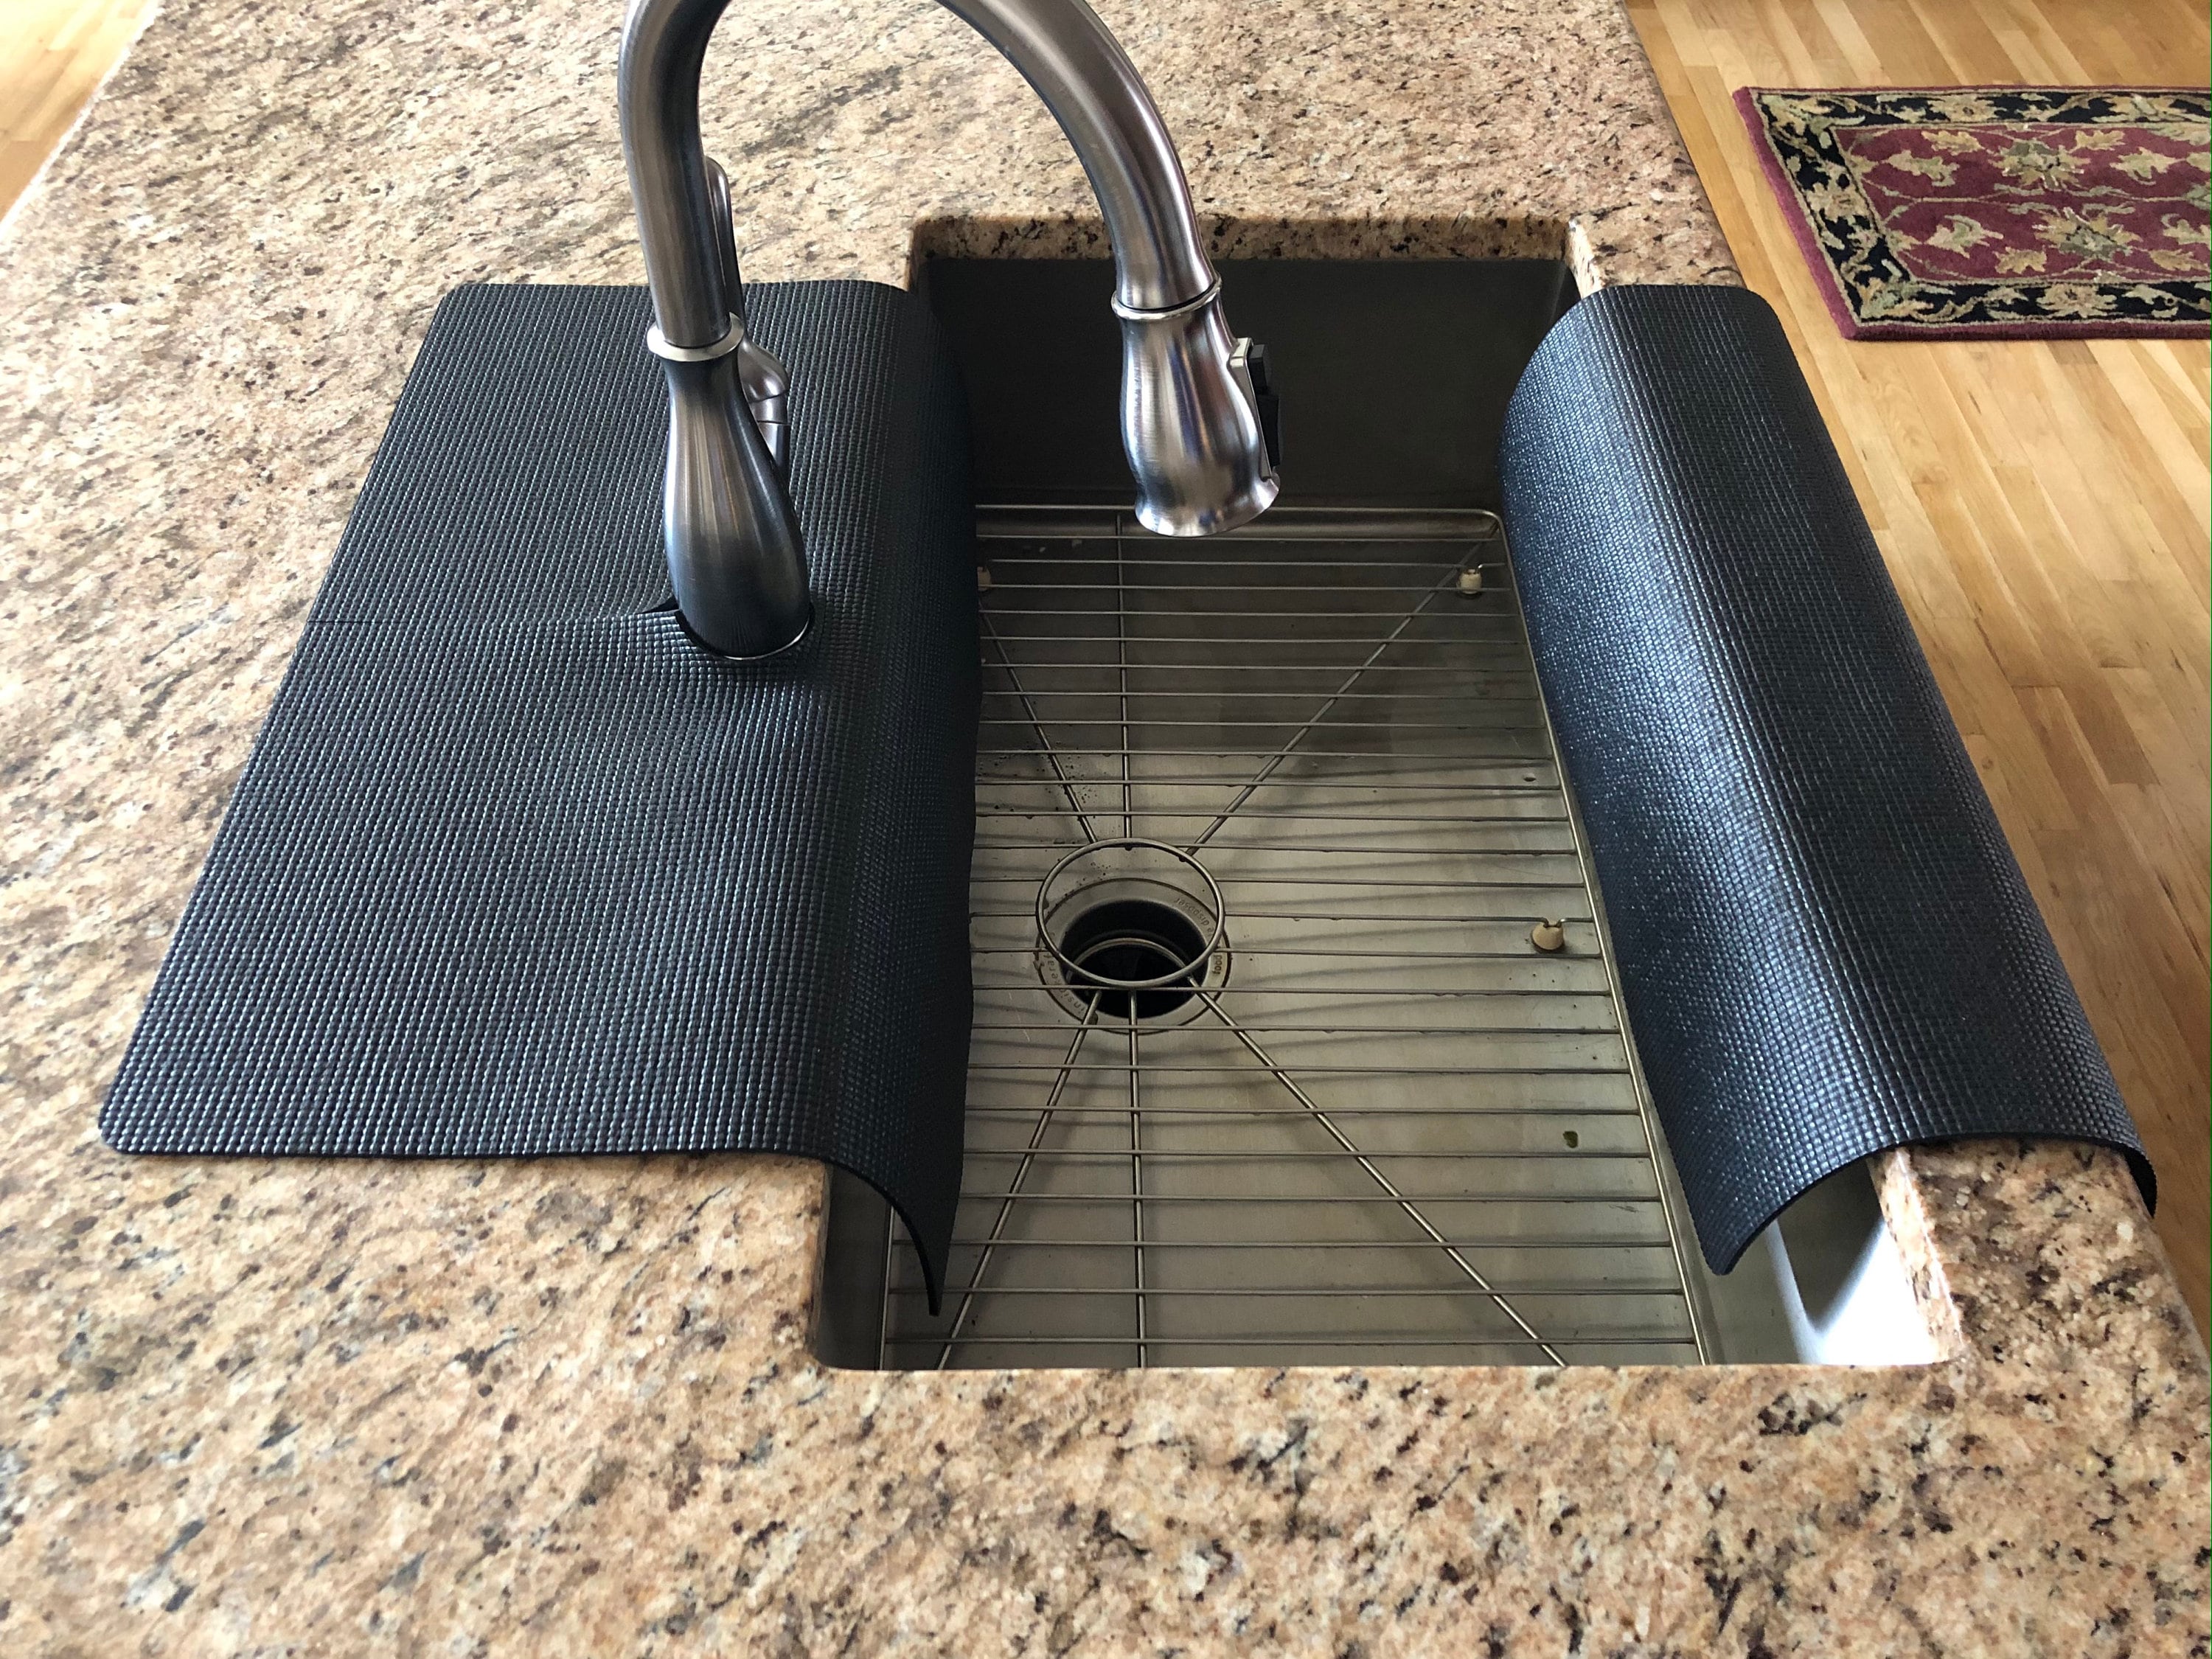 Black FAUCET SPLASH GUARD, Drip Catcher, Kitchen Sink Protection, Granite  Countertop Chip Protector, 17 in W X 23 in L, Patent Approved 